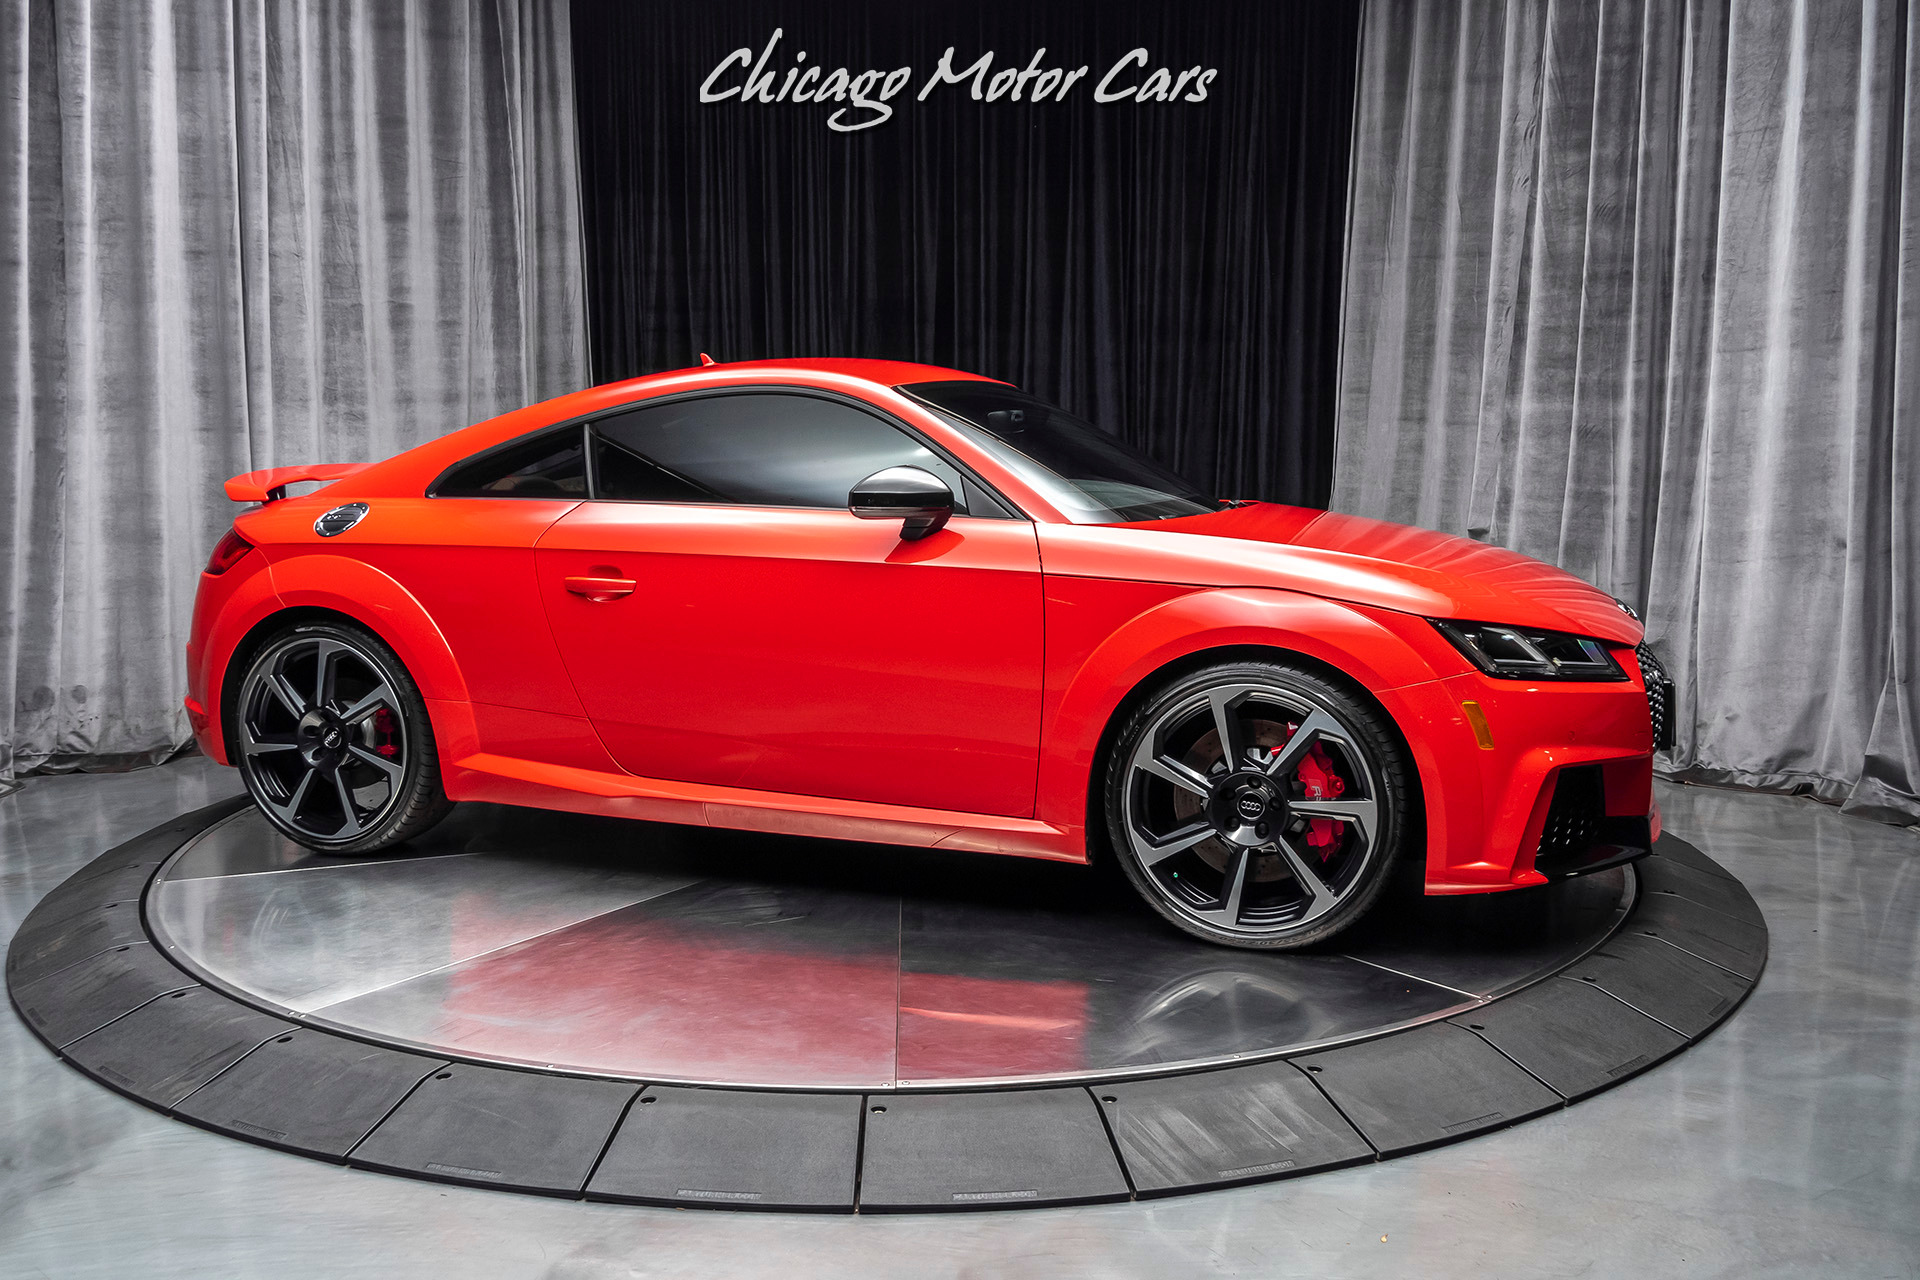 Used 2018 Audi TT RS 2.5T Original MSRP $74k+ TECHNOLOGY PKG! BLACK OPTIC PACKAGE! For Sale (Special Pricing) Chicago Motor Cars Stock #17043A